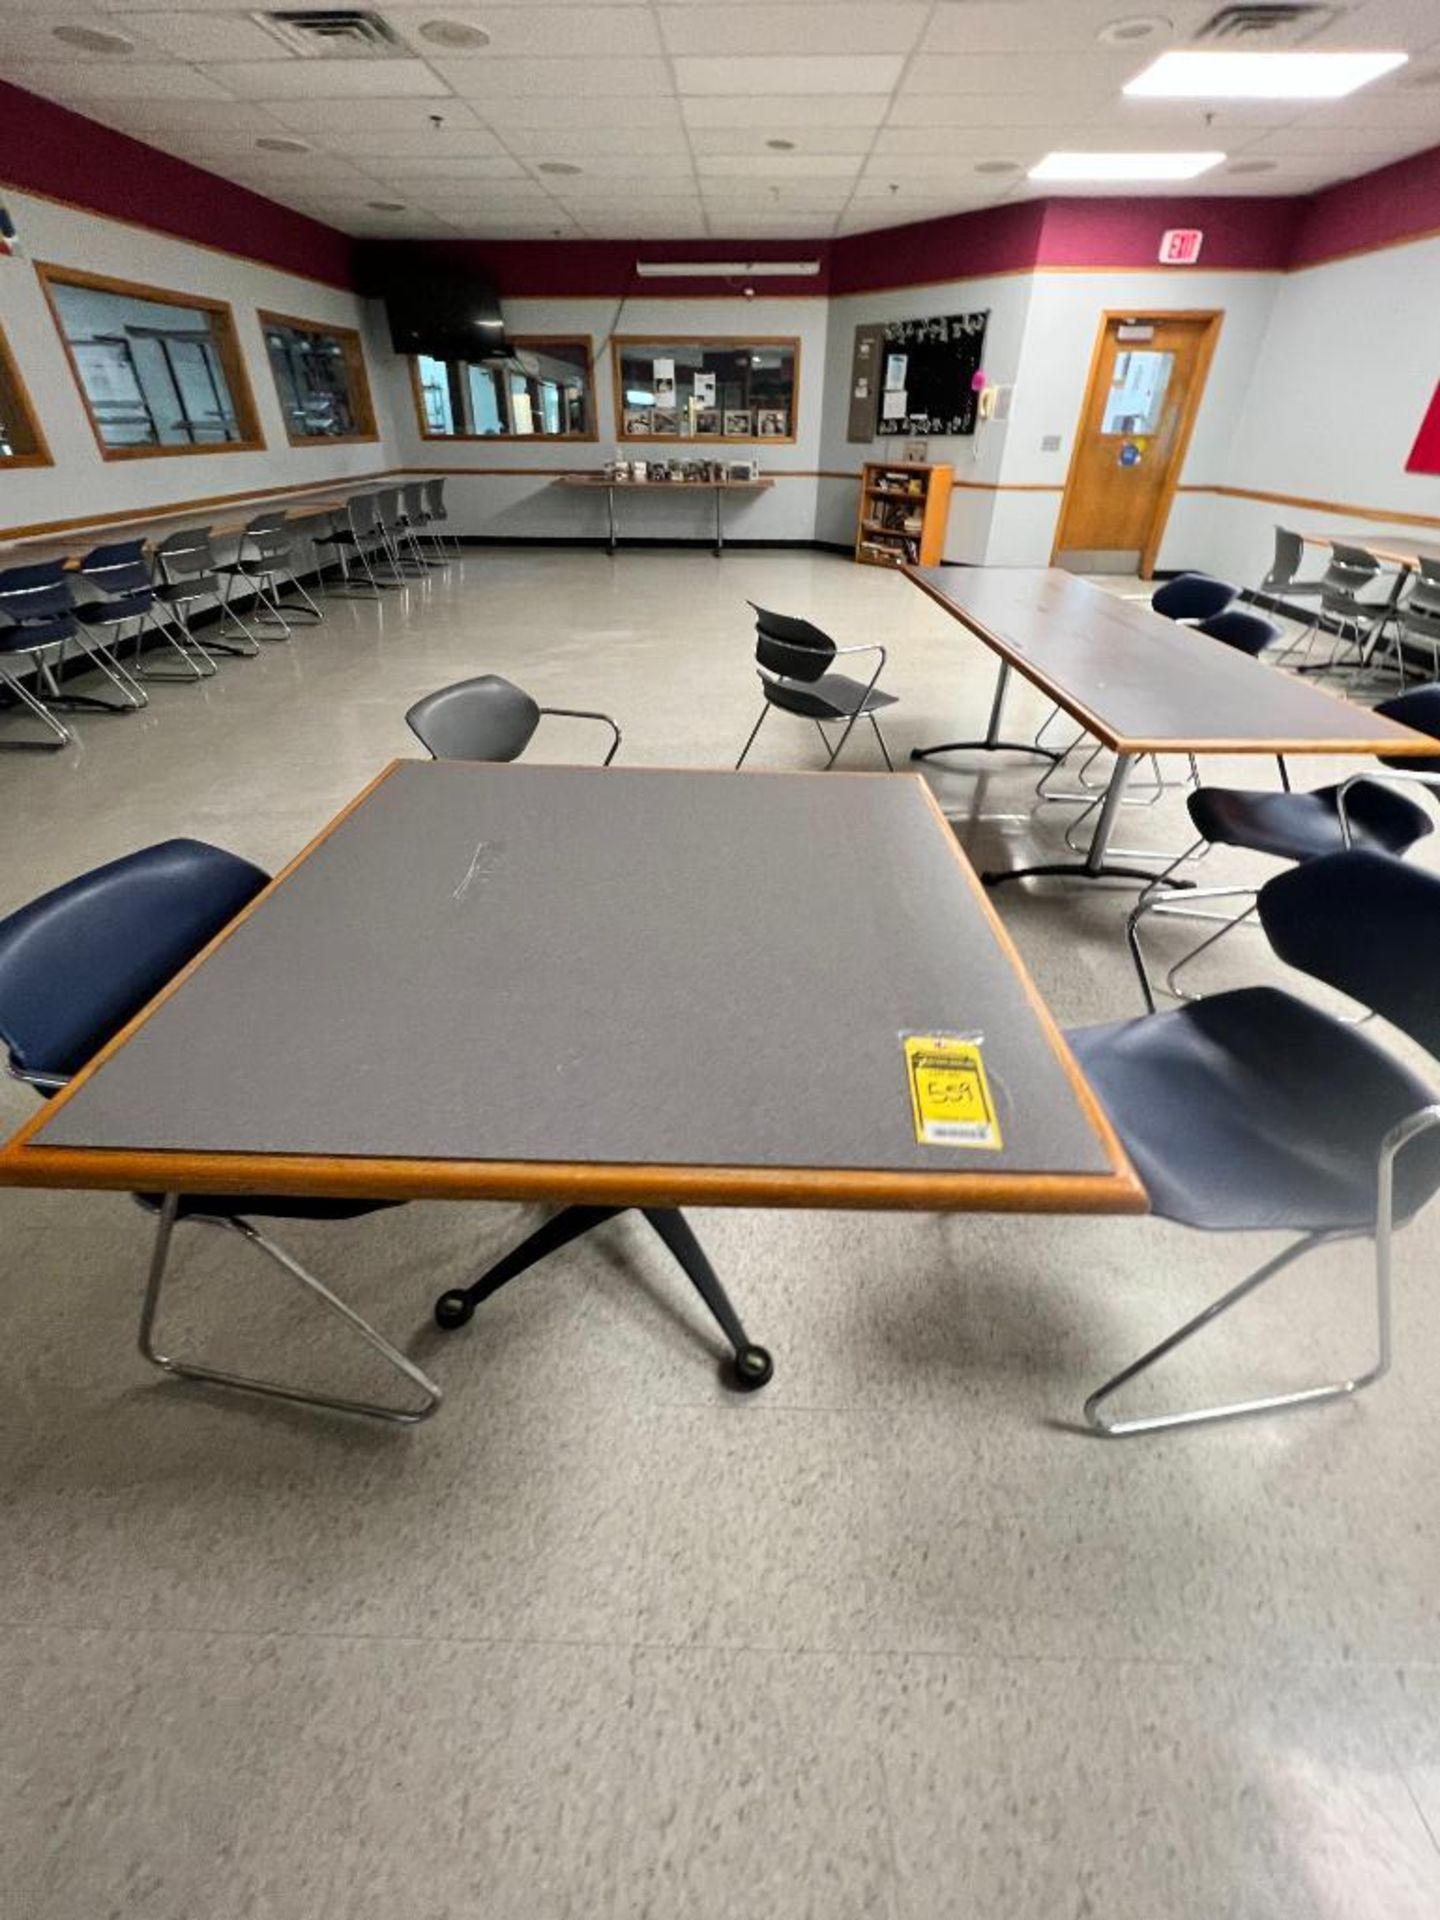 Contents of Cafeteria (10) Tables, (50) Chairs, (3) Bookcases